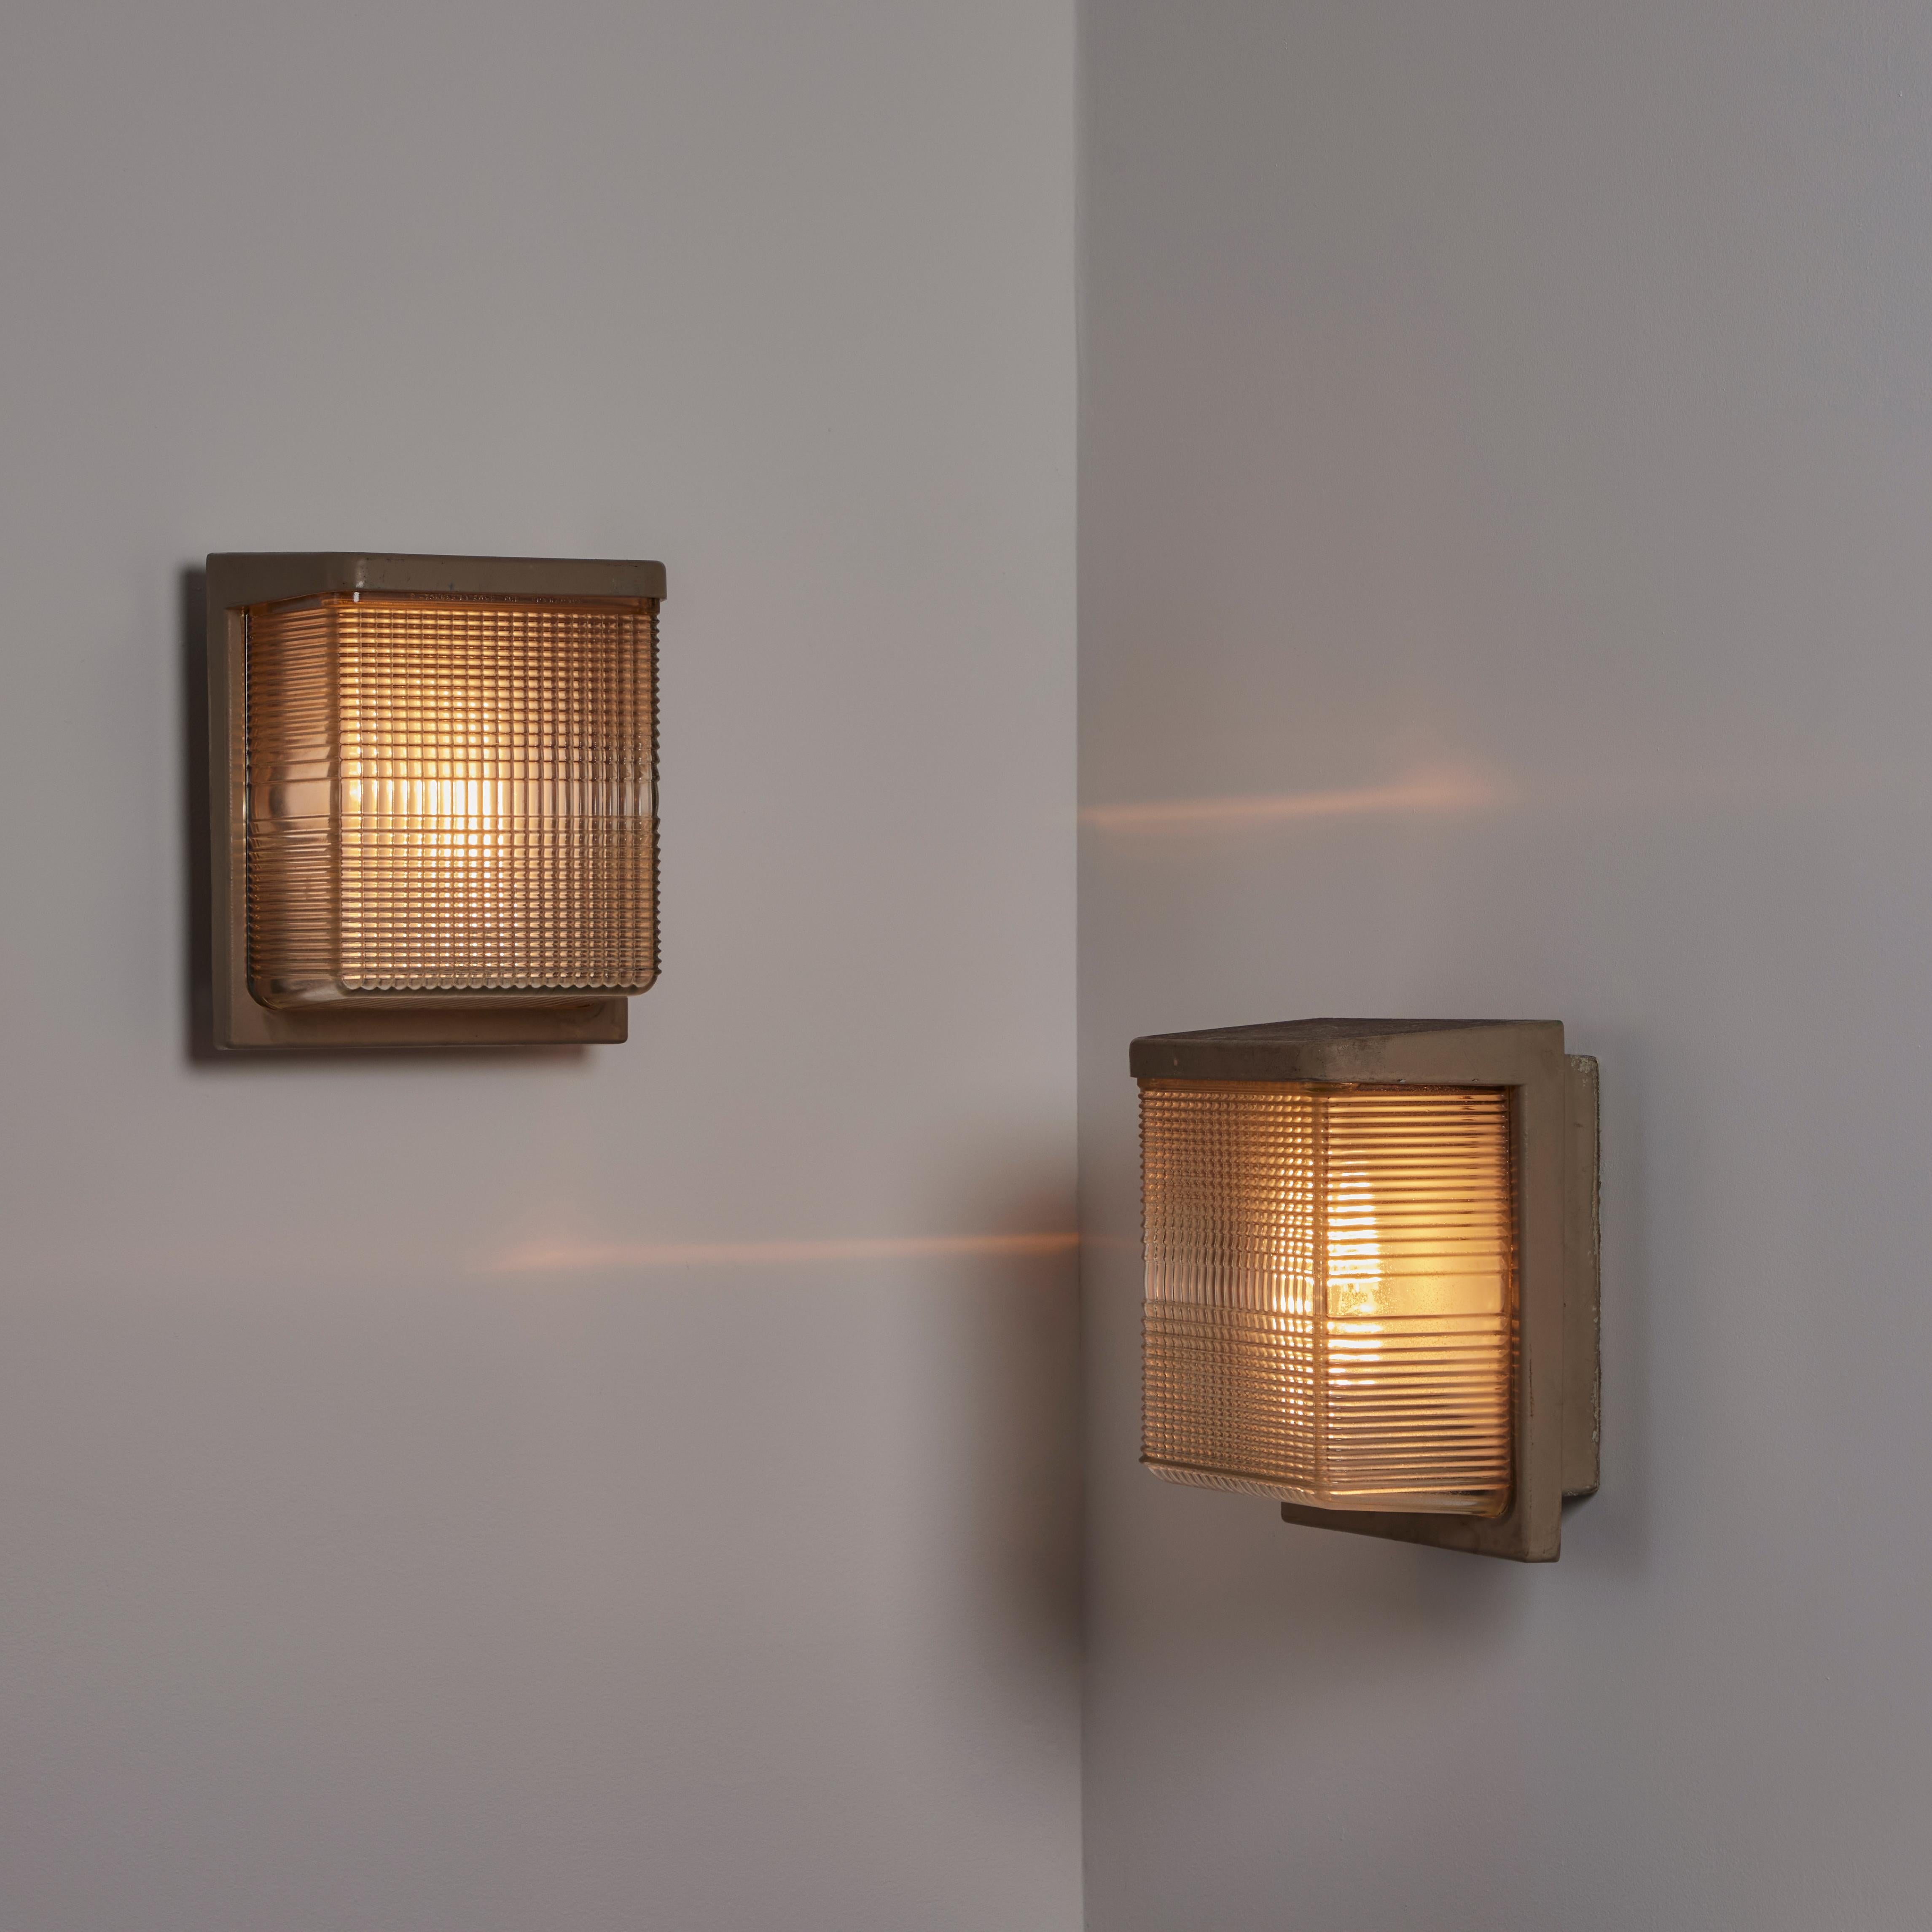 Pair of Halophane Sconces. Designed and manufactured in France, circa the 1950s. Halophane glass and enameled metal make up these classic indoor/outdoor sconces. Each unit holds a single E27 socket type, adapted for the US. We recommend a single